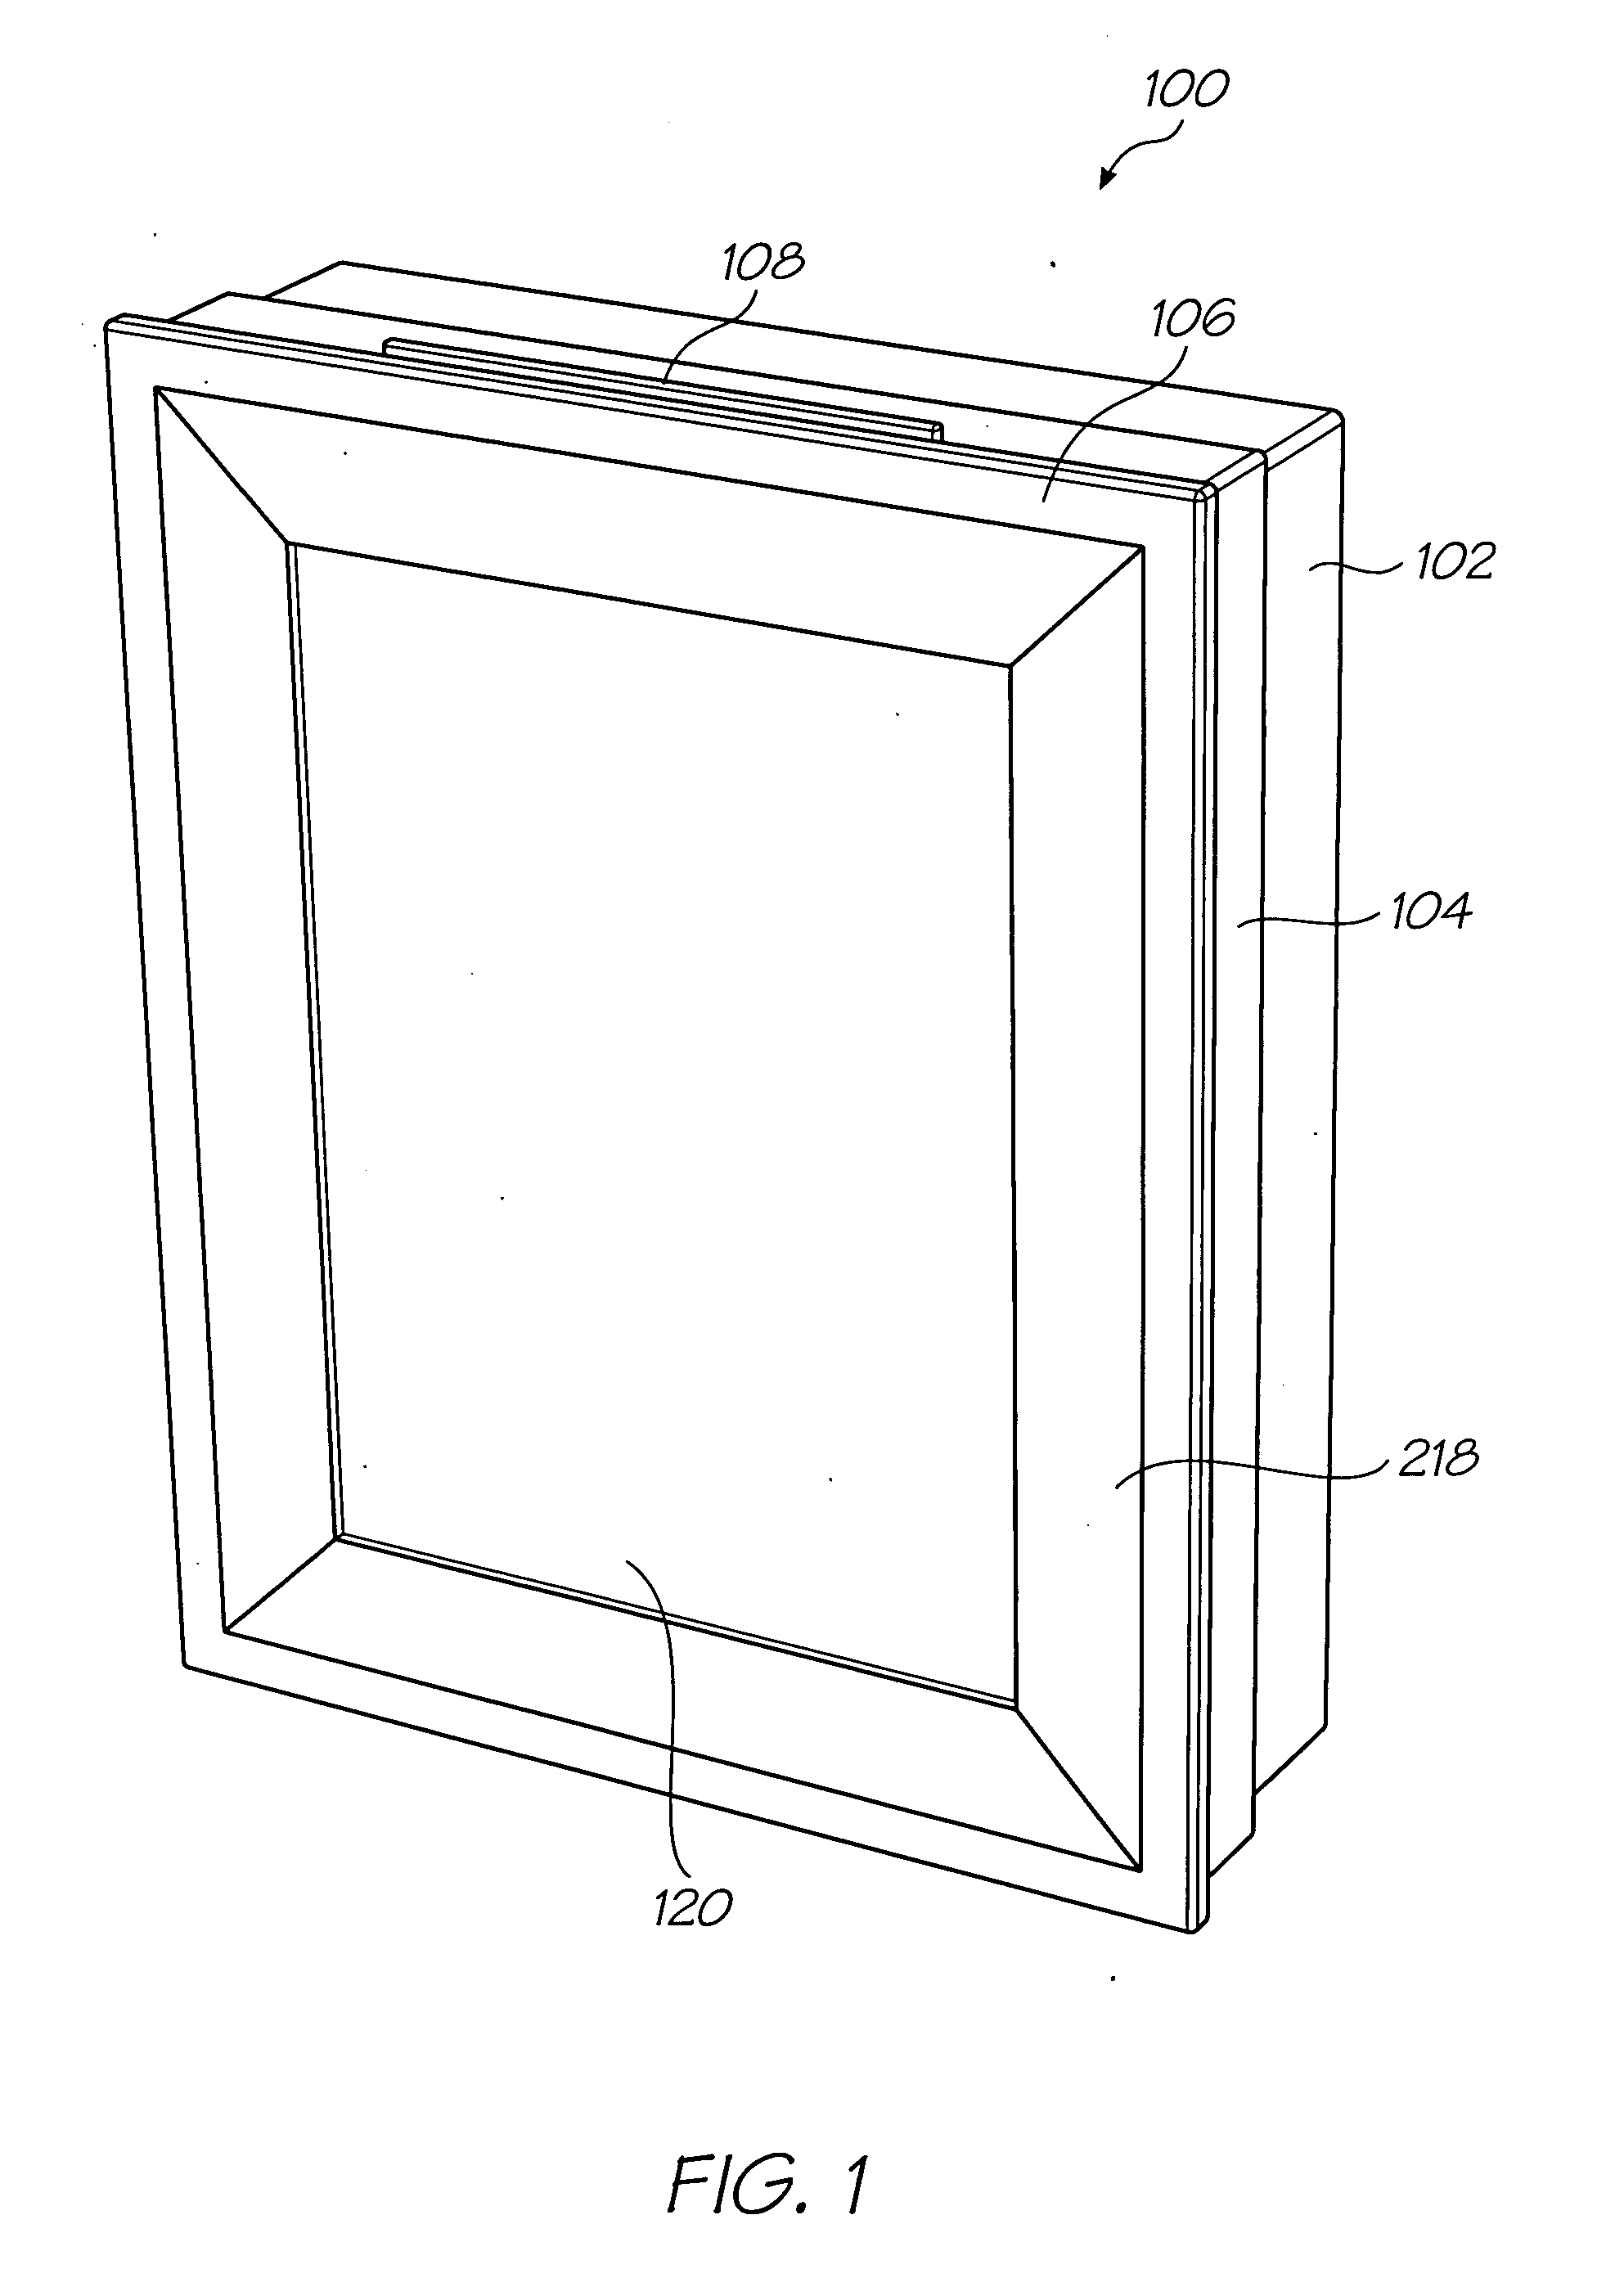 Wall mountable printer with removable cartridge